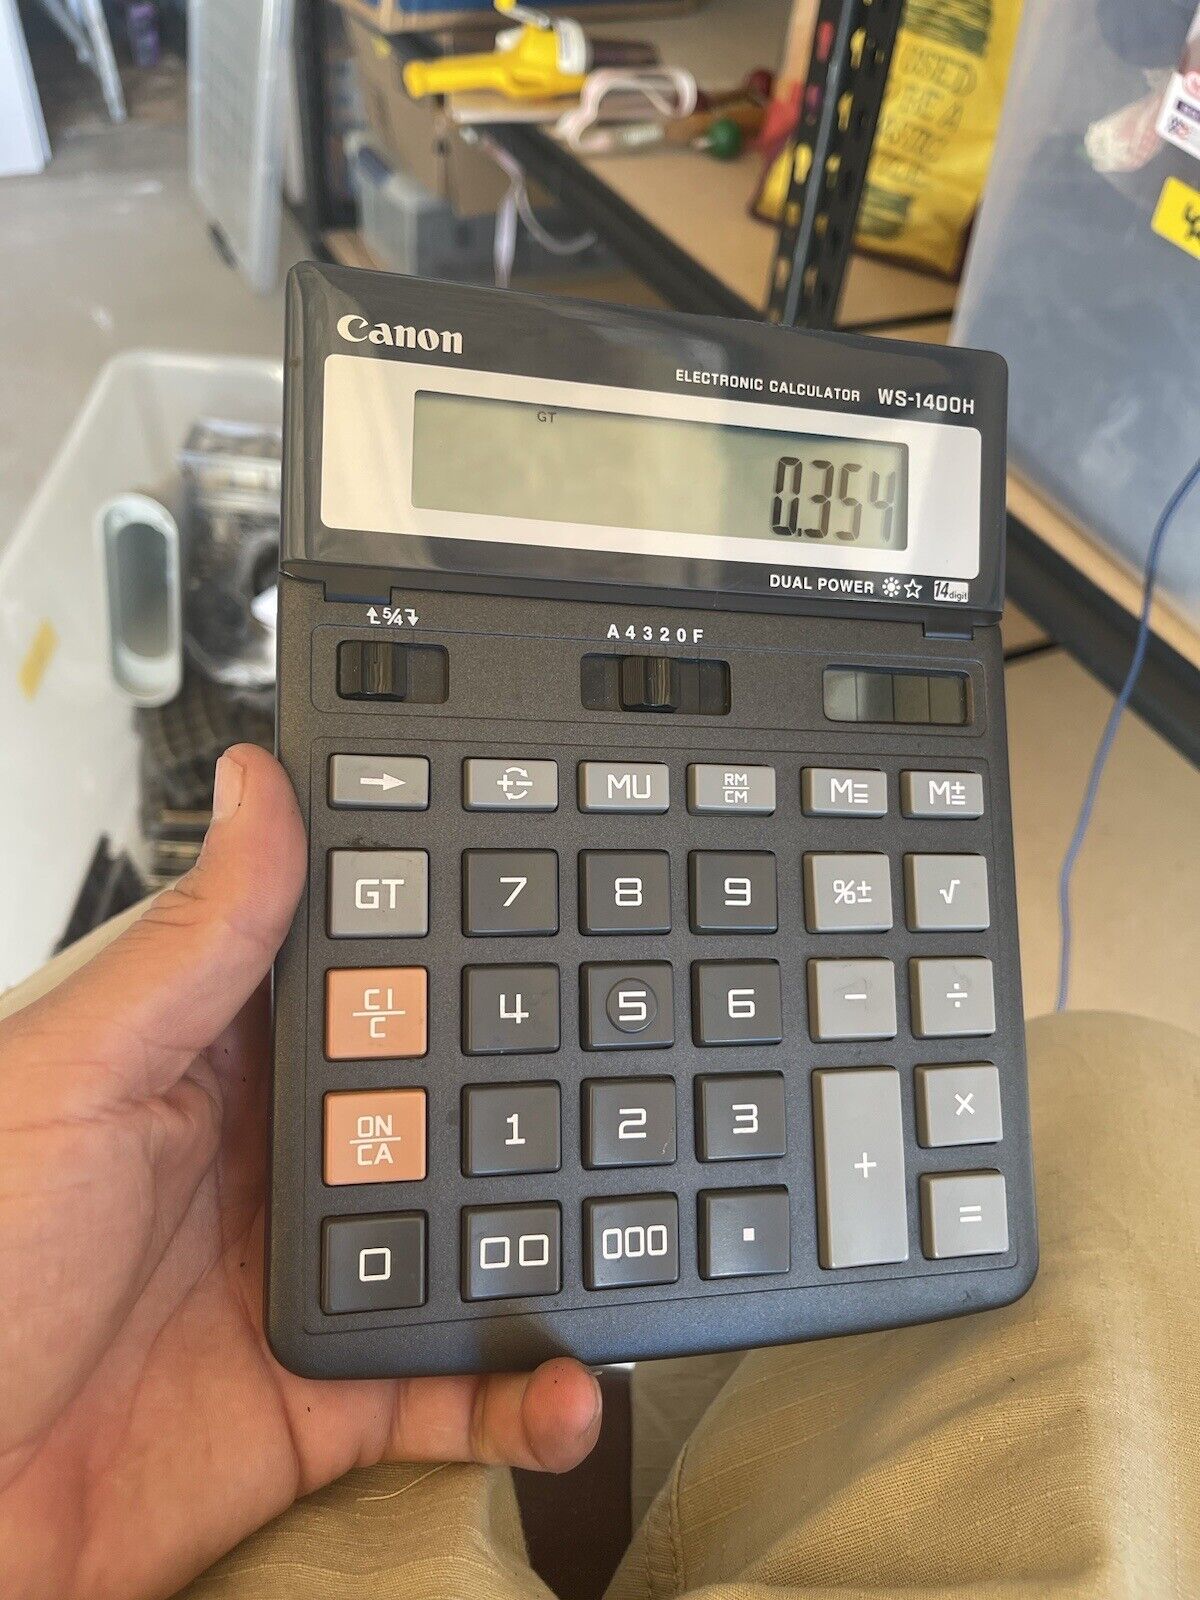 Canon Calculator WS-1400H Dual Power Large buttons